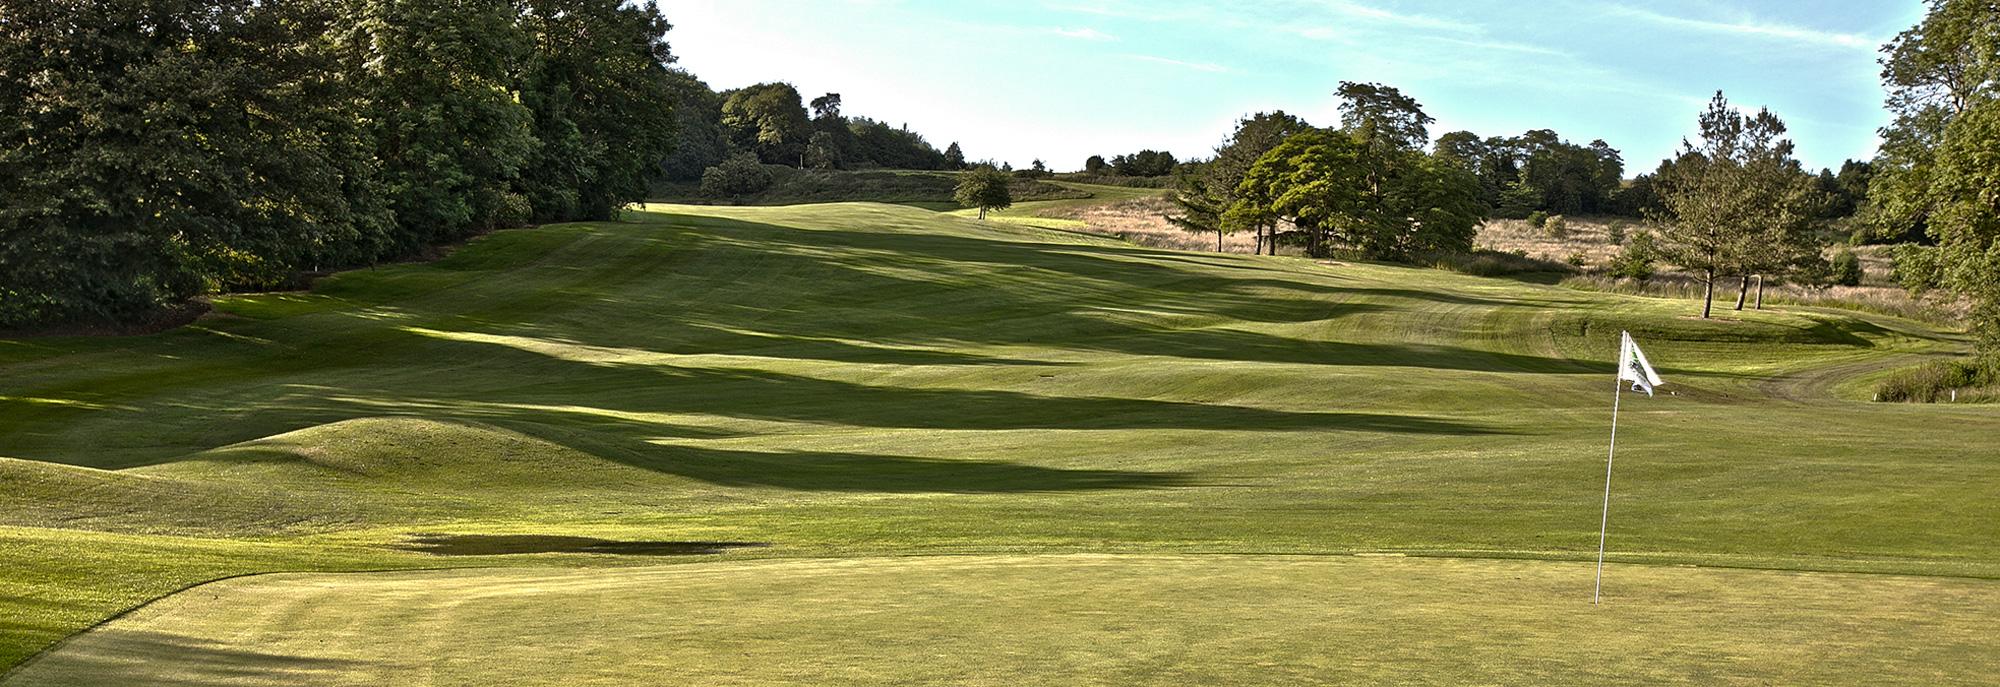 Beuzeval-Houlgate provides several of the premiere golf course near Normandy